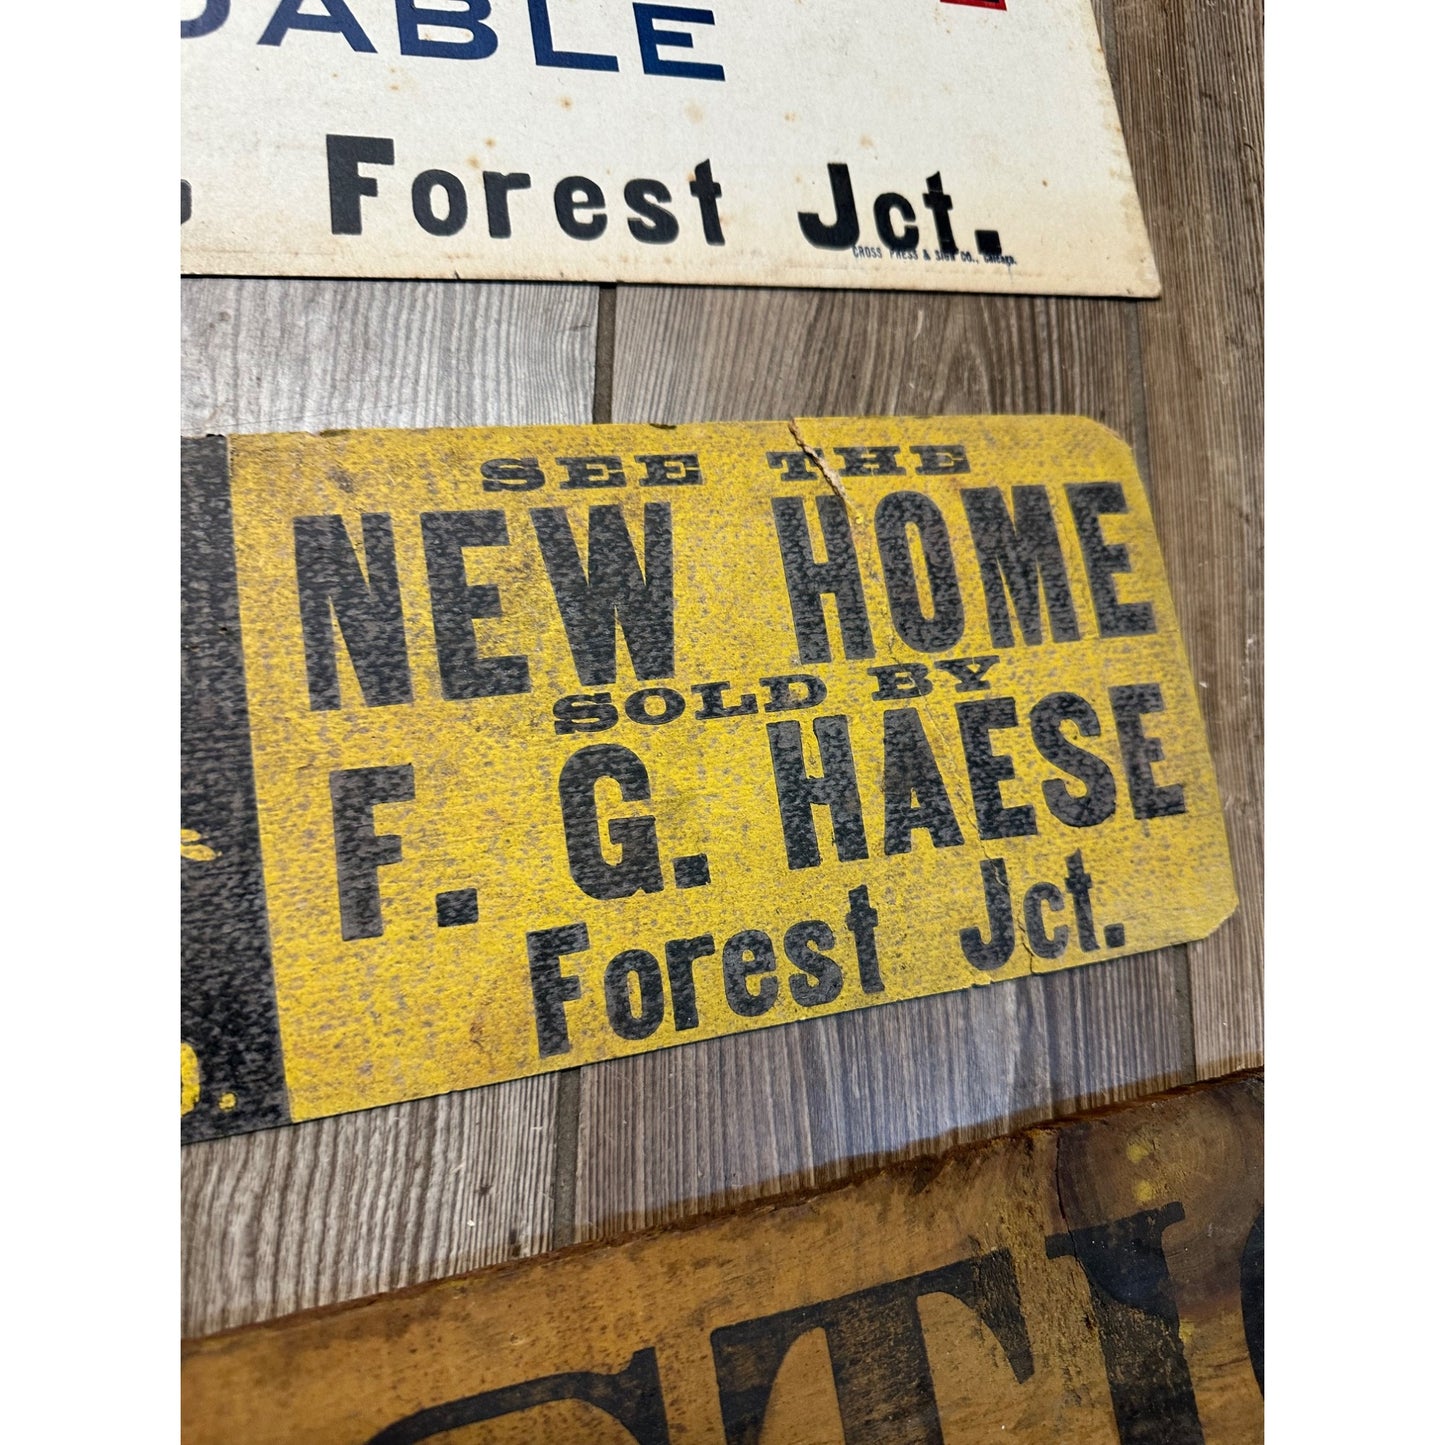 RARE Early 1900s Haese General Store (Forest Junction Wis) Advertising Signs Sewing Machine ++